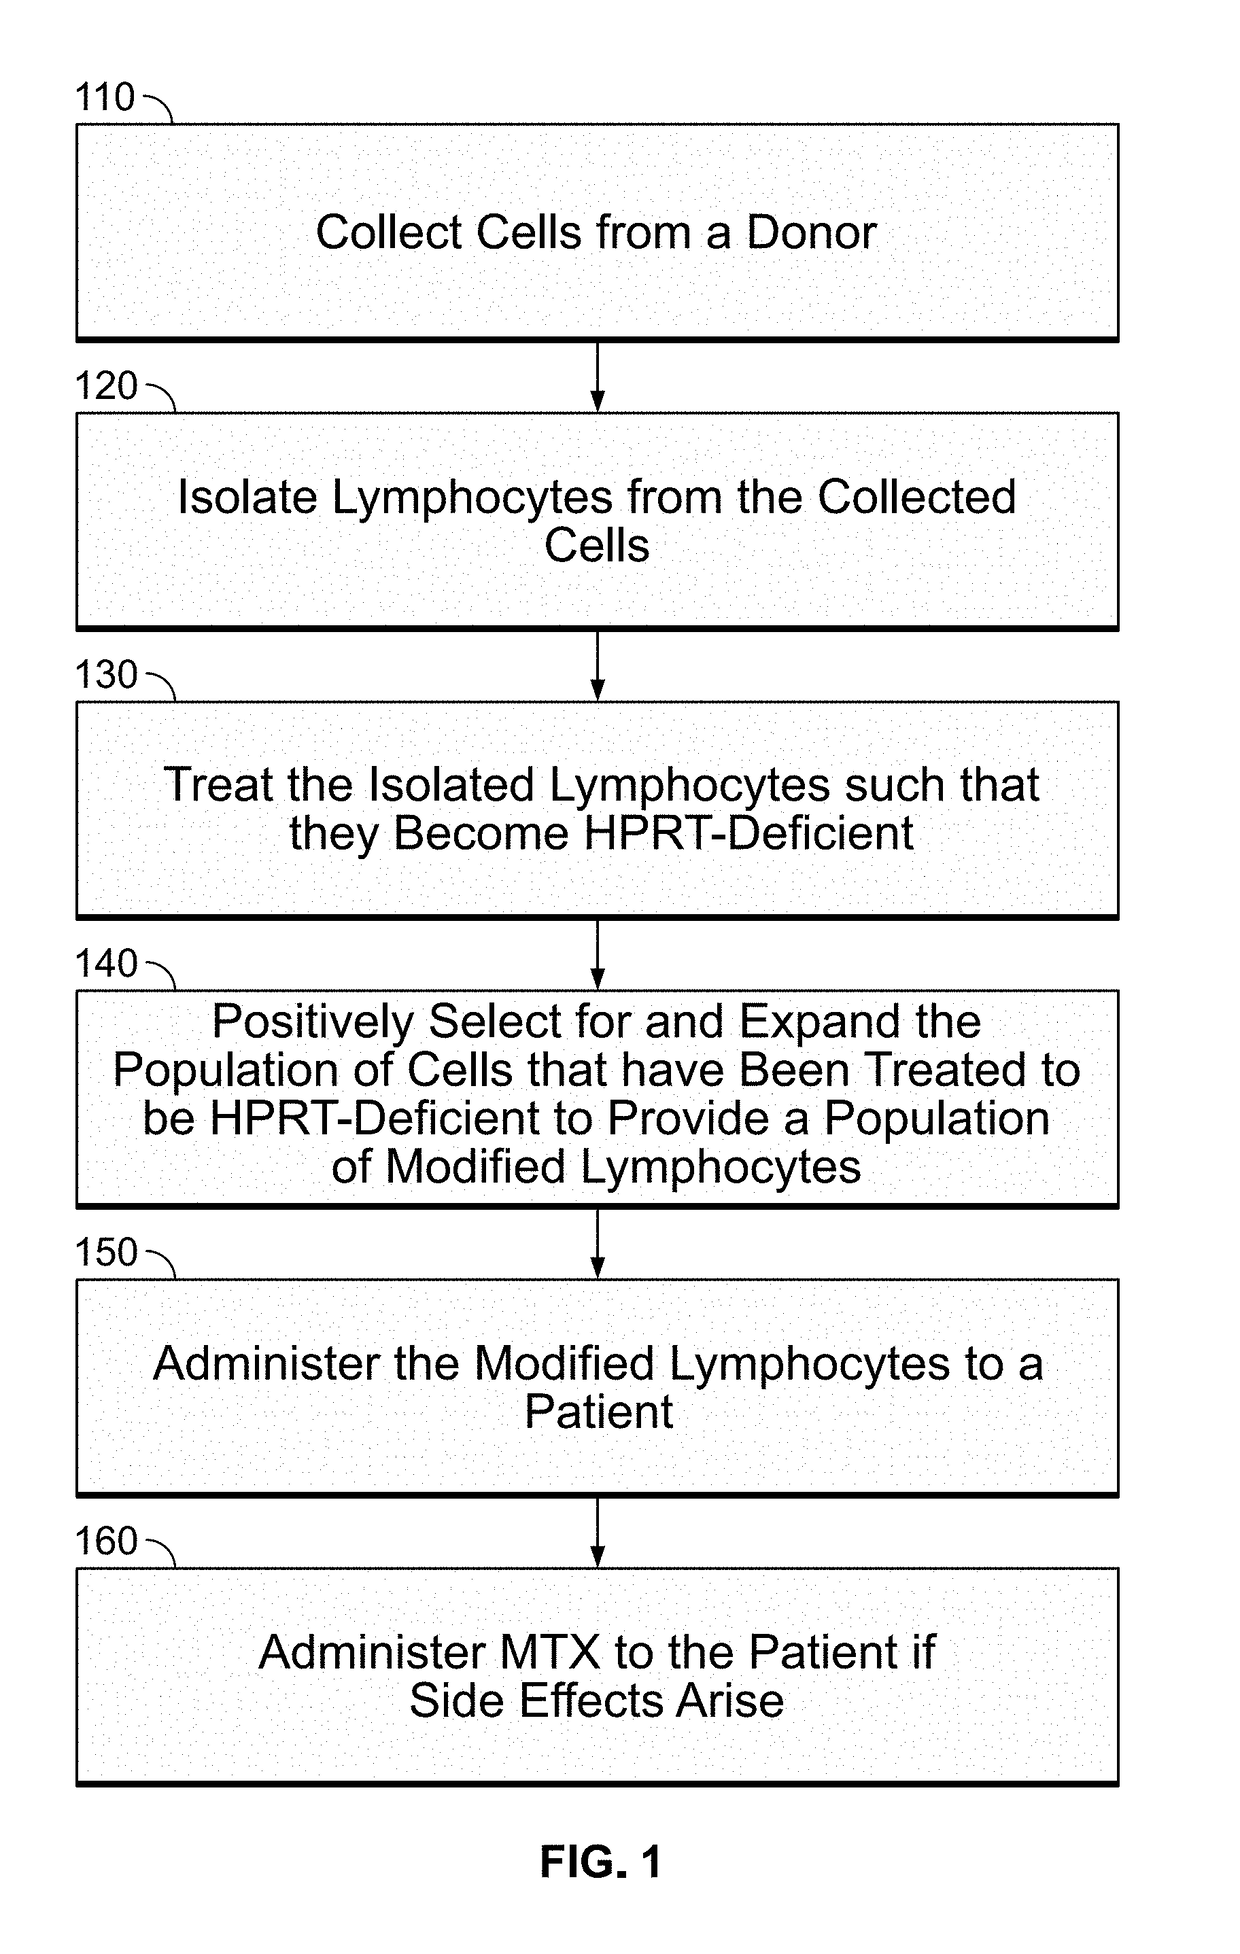 Modulatable switch for selection of donor modified cells